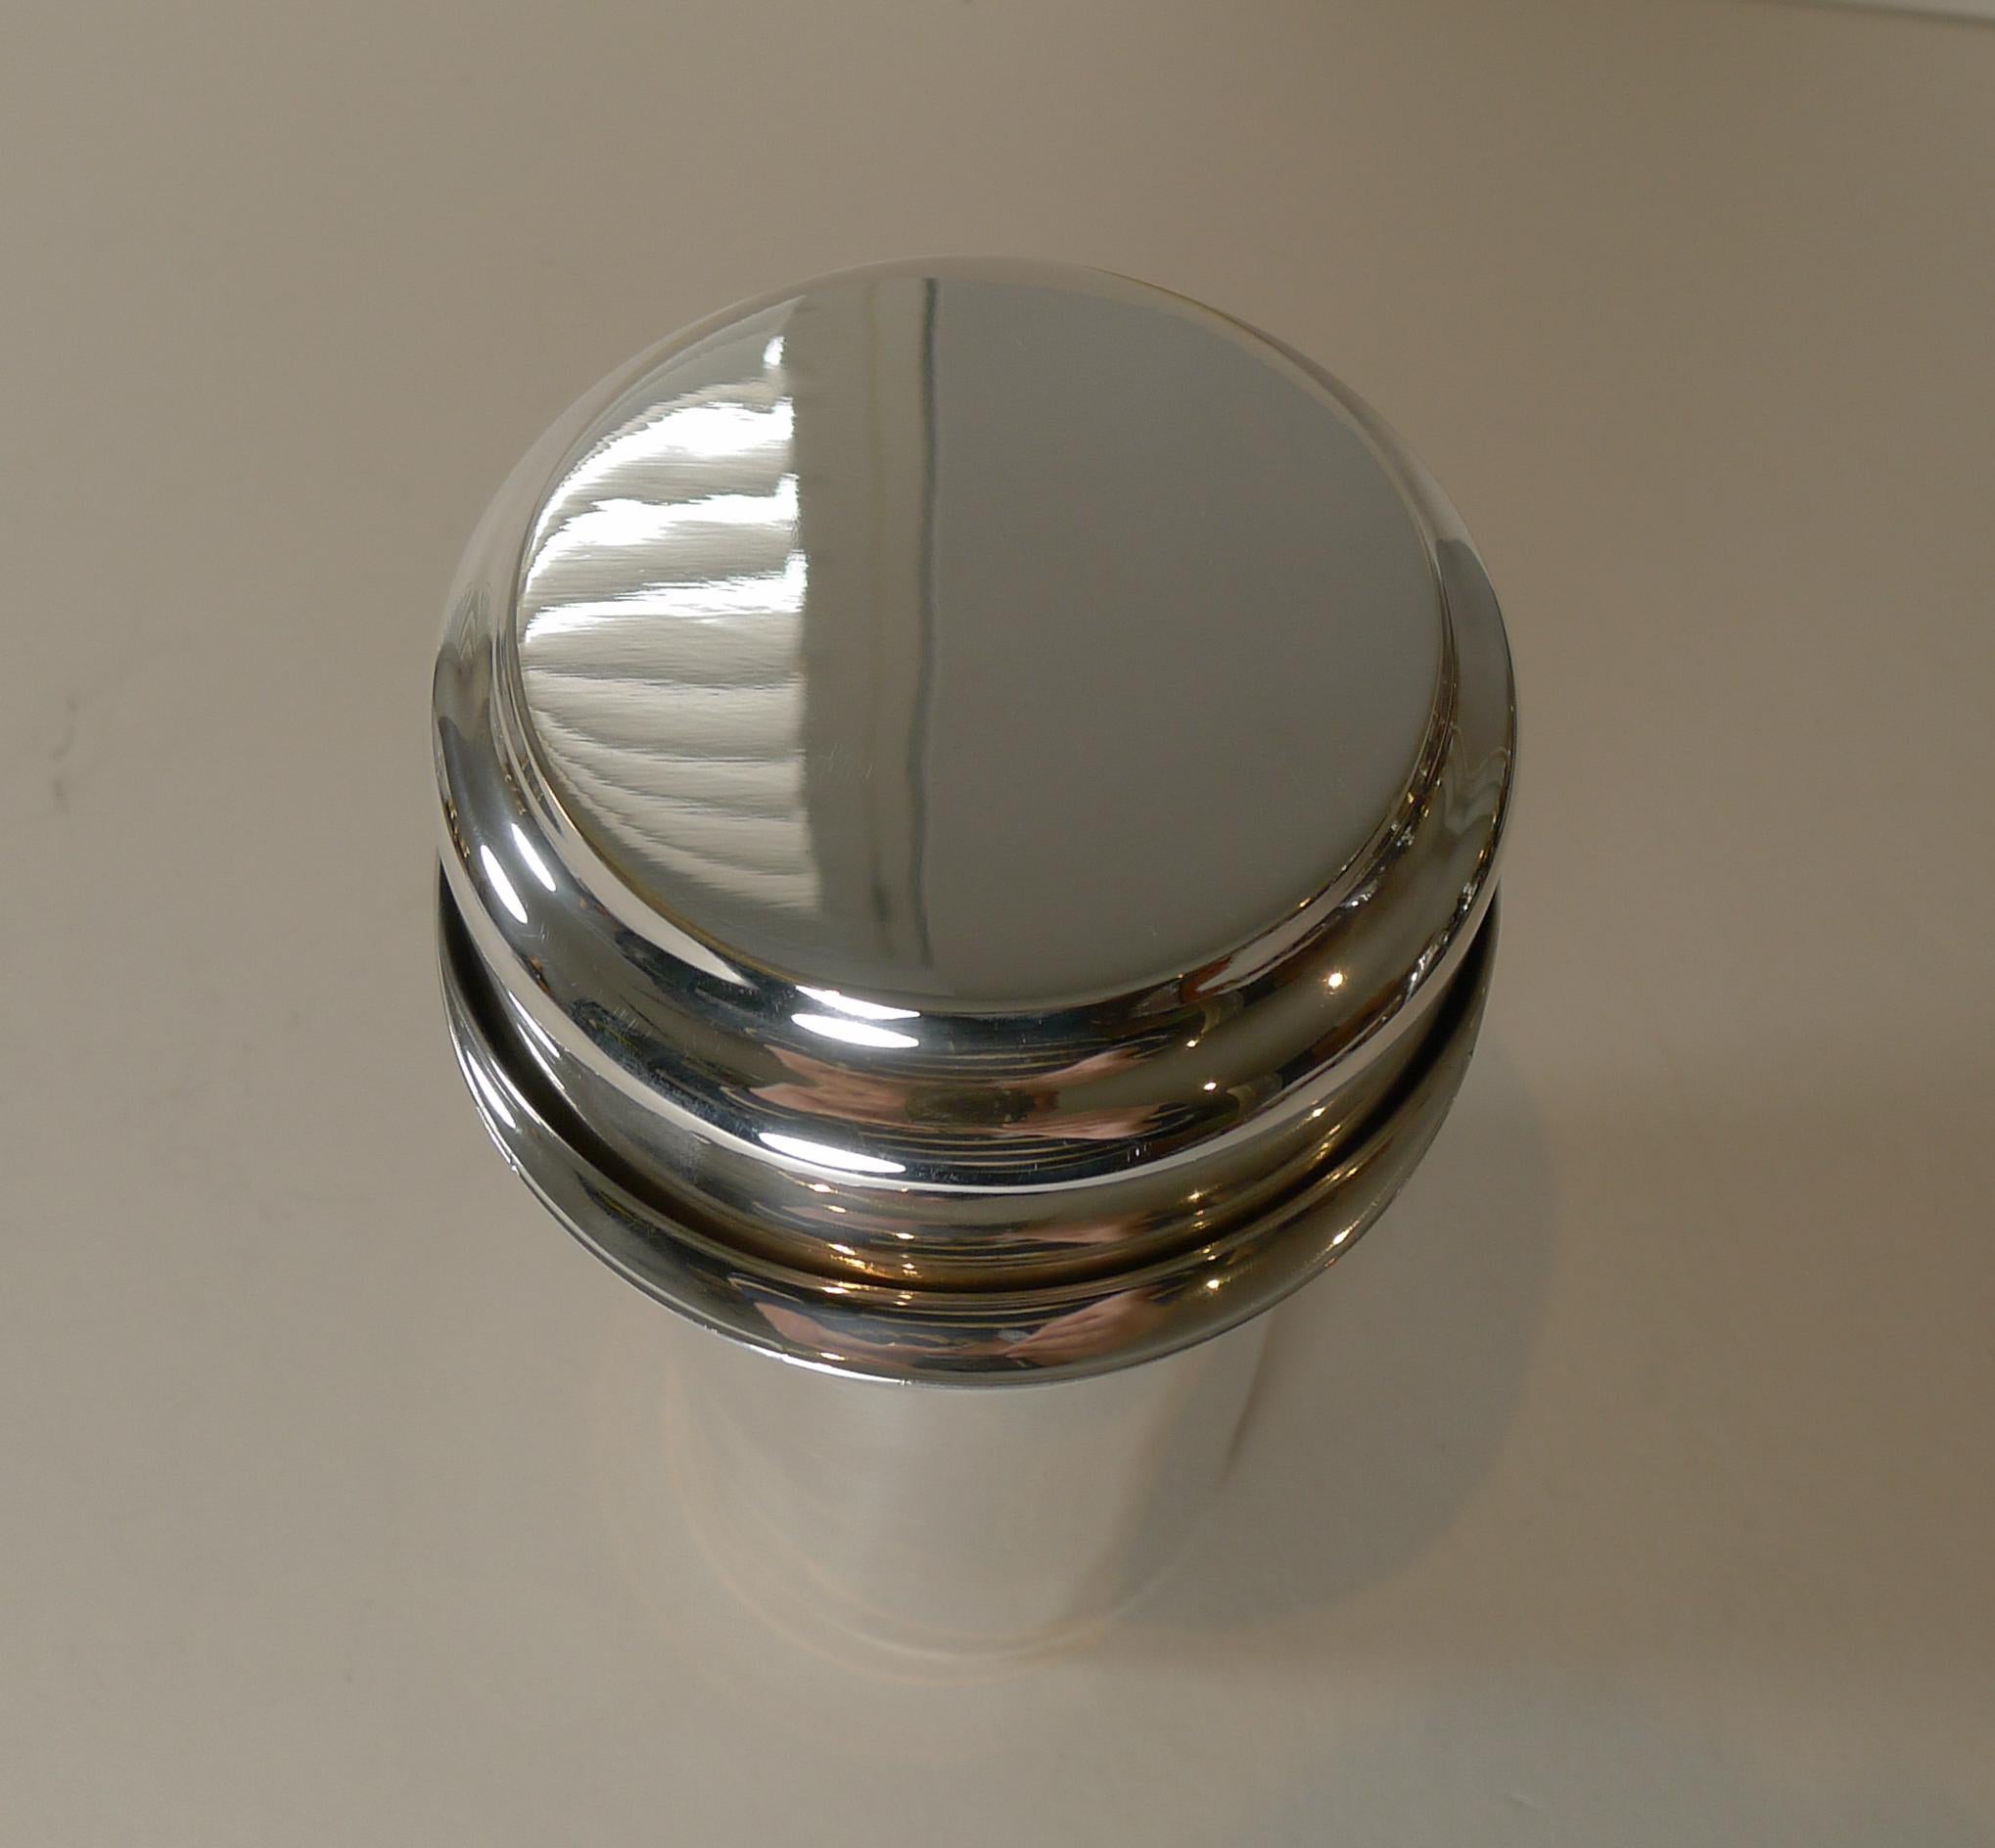 Vintage Italian Silver Plated Cocktail Shaker by Lino Sabattini, c.1960 For Sale 8